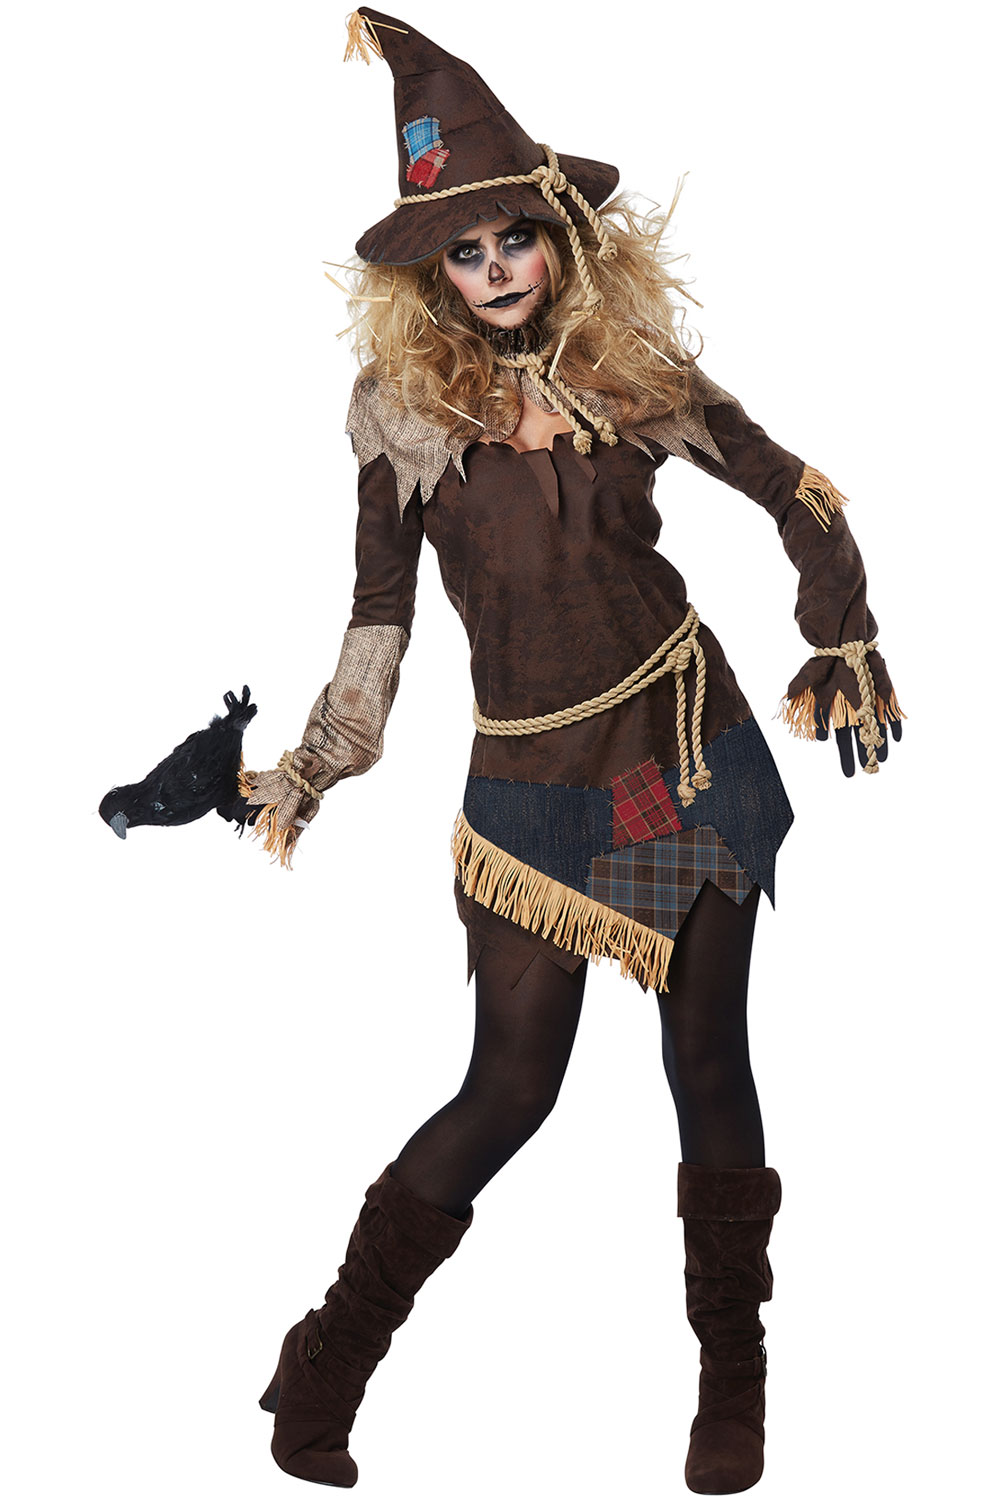 California Costumes Creepy Scarecrow Women Adult Costume Cosplay Party 01439 